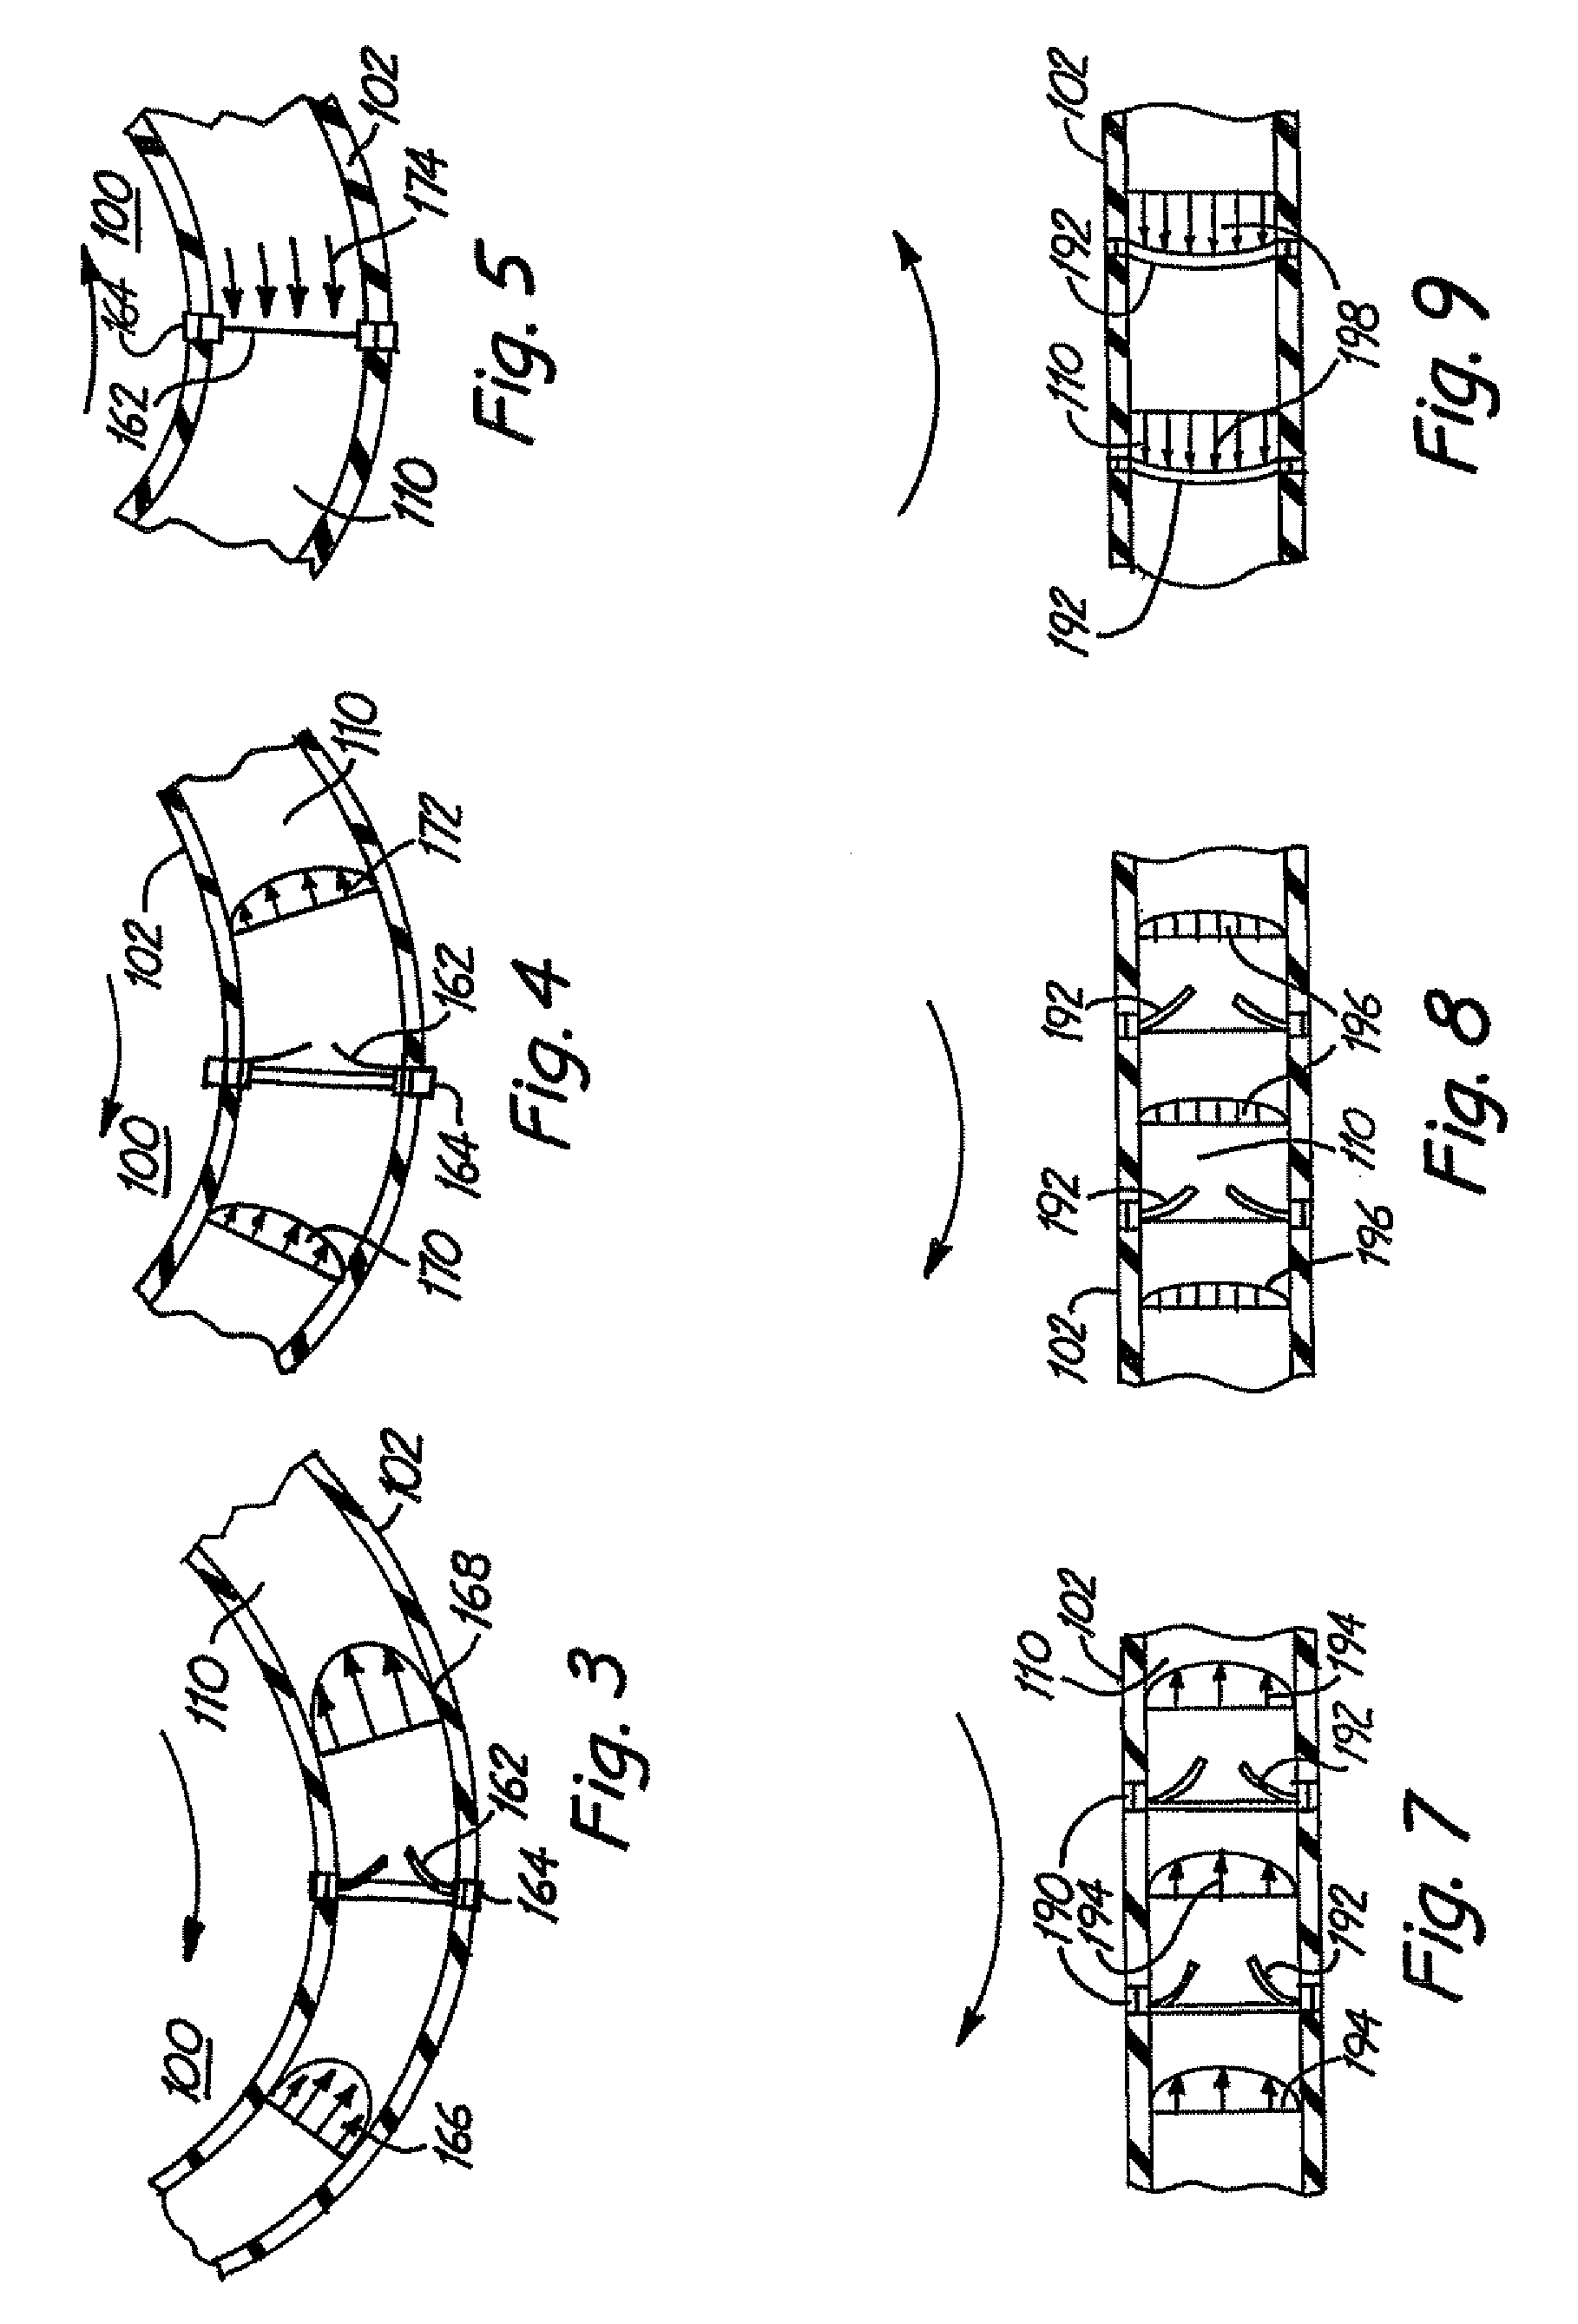 Flow system for medical device evaluation and production